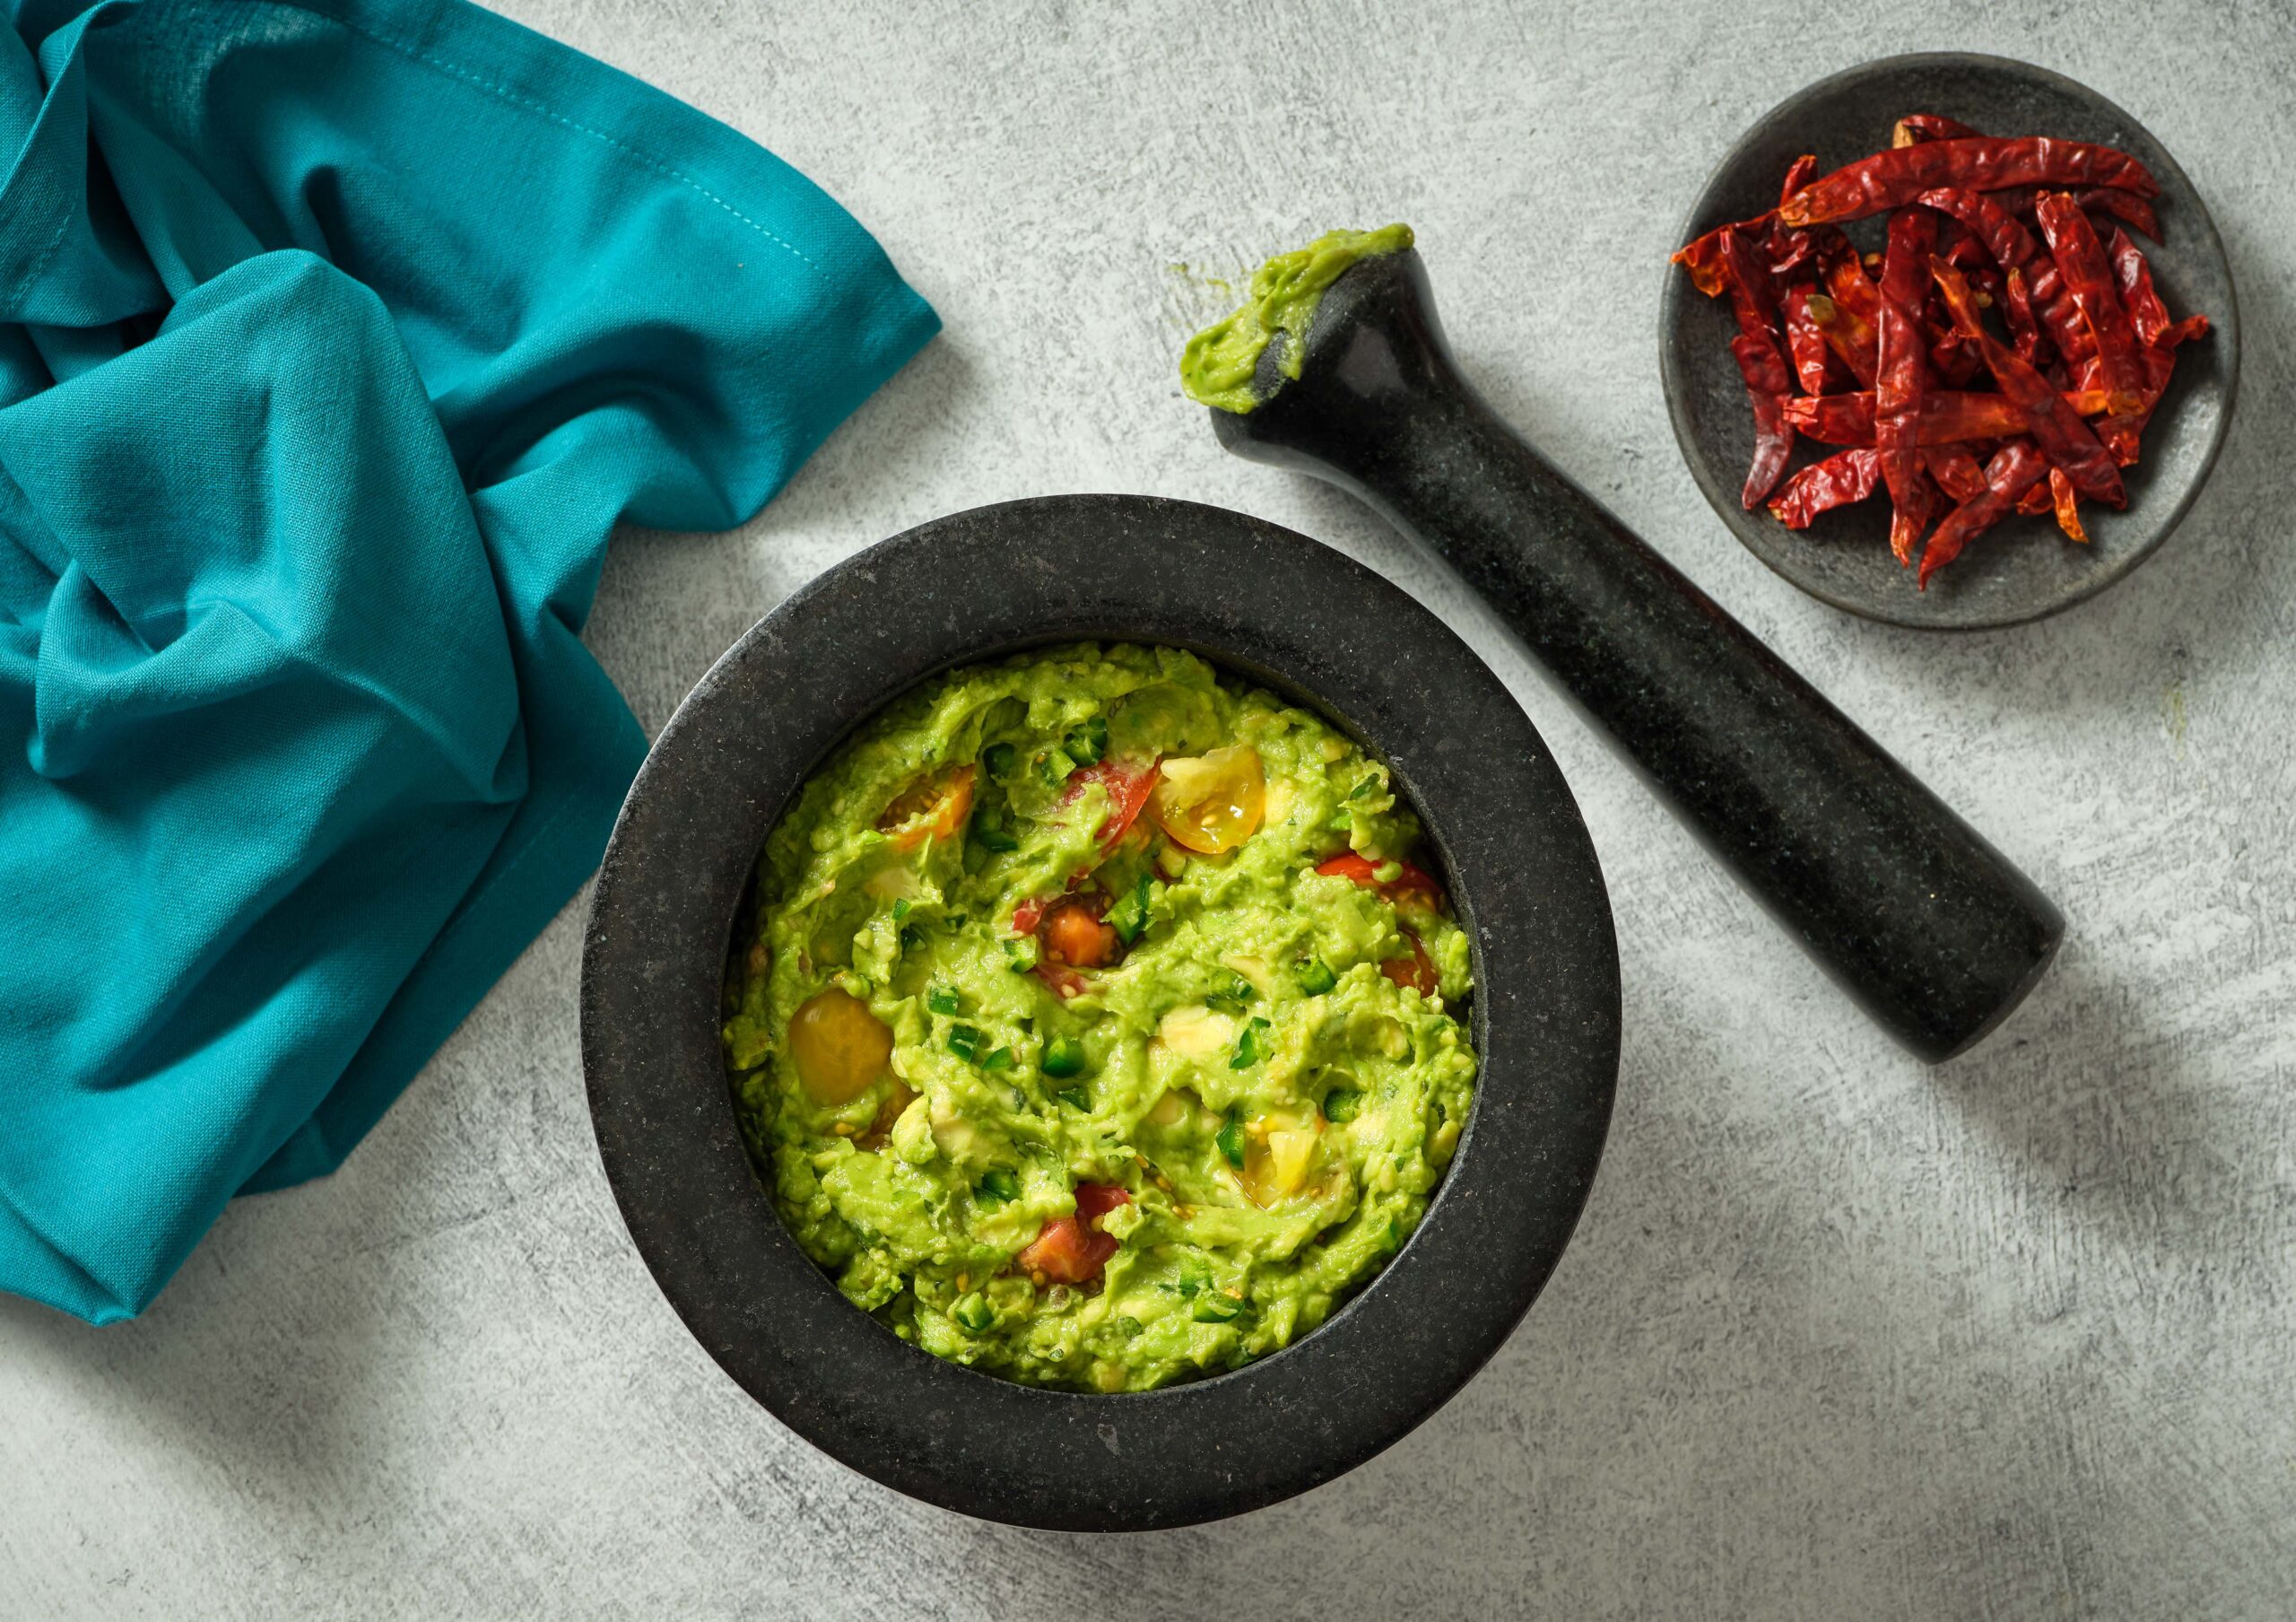 Good Morning America: Pati Jinich shares 3 guacamole recipes you can try at home